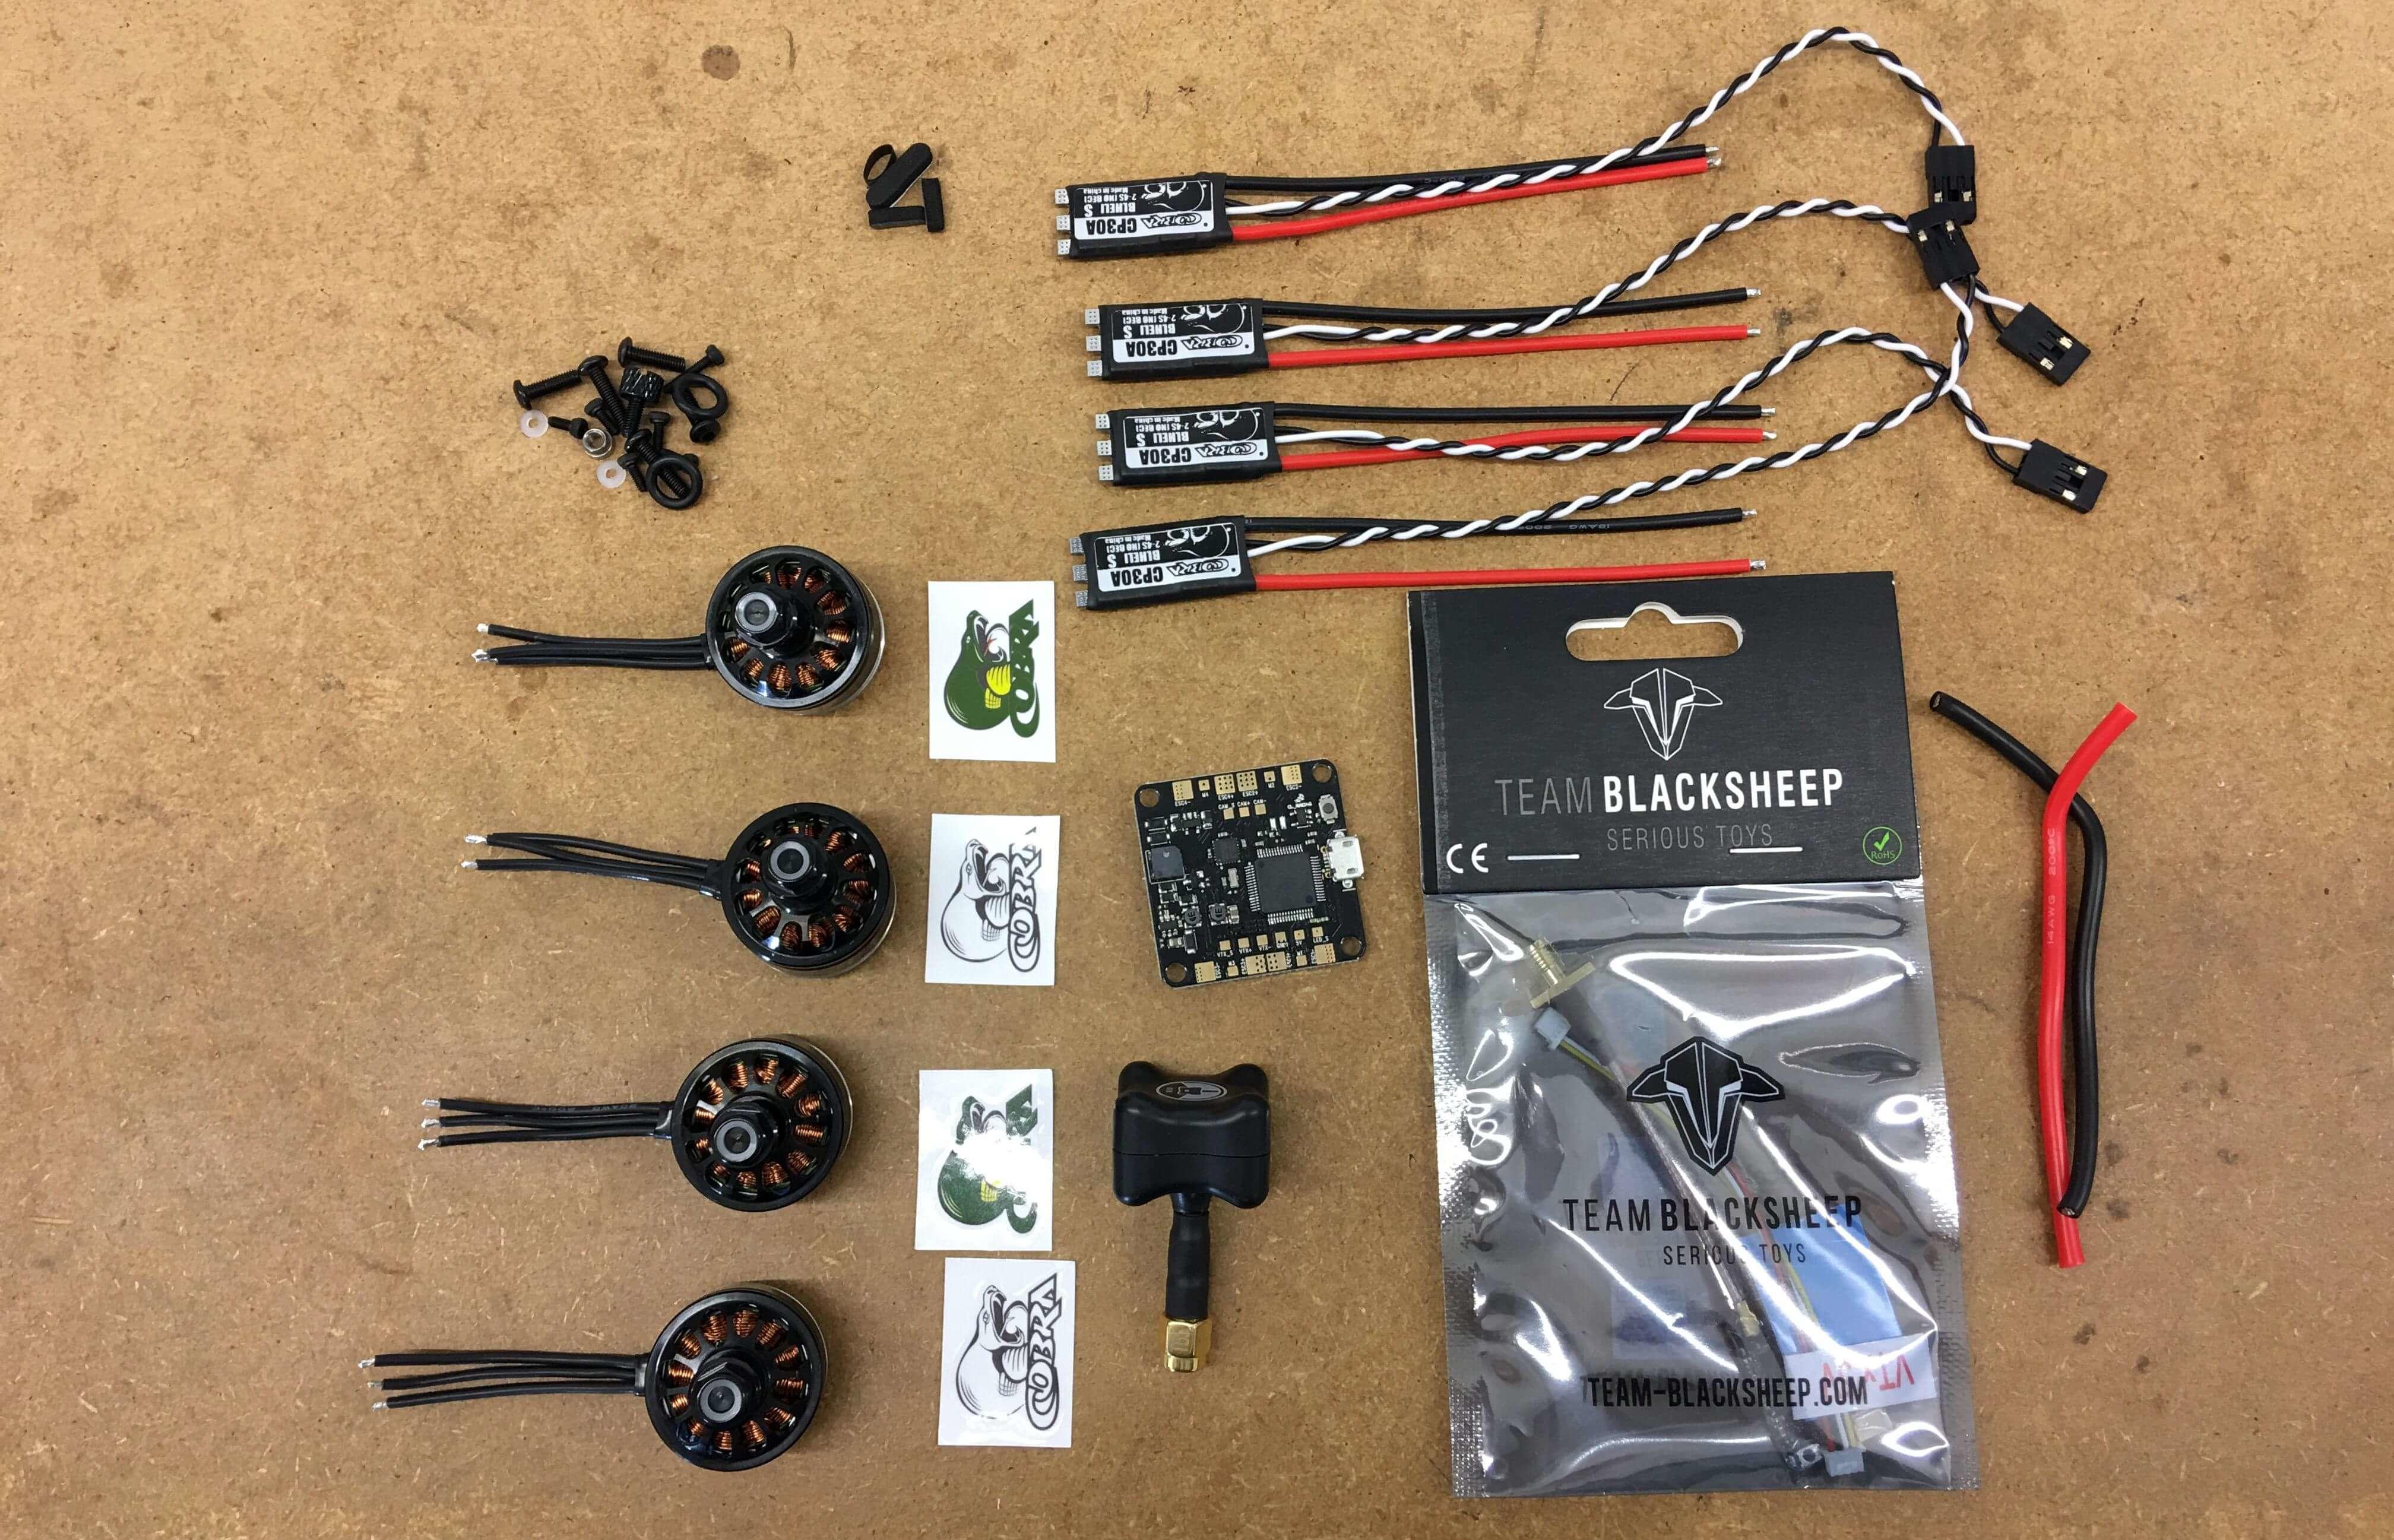 Component layout for Tom Smith Chameleon FPV Build